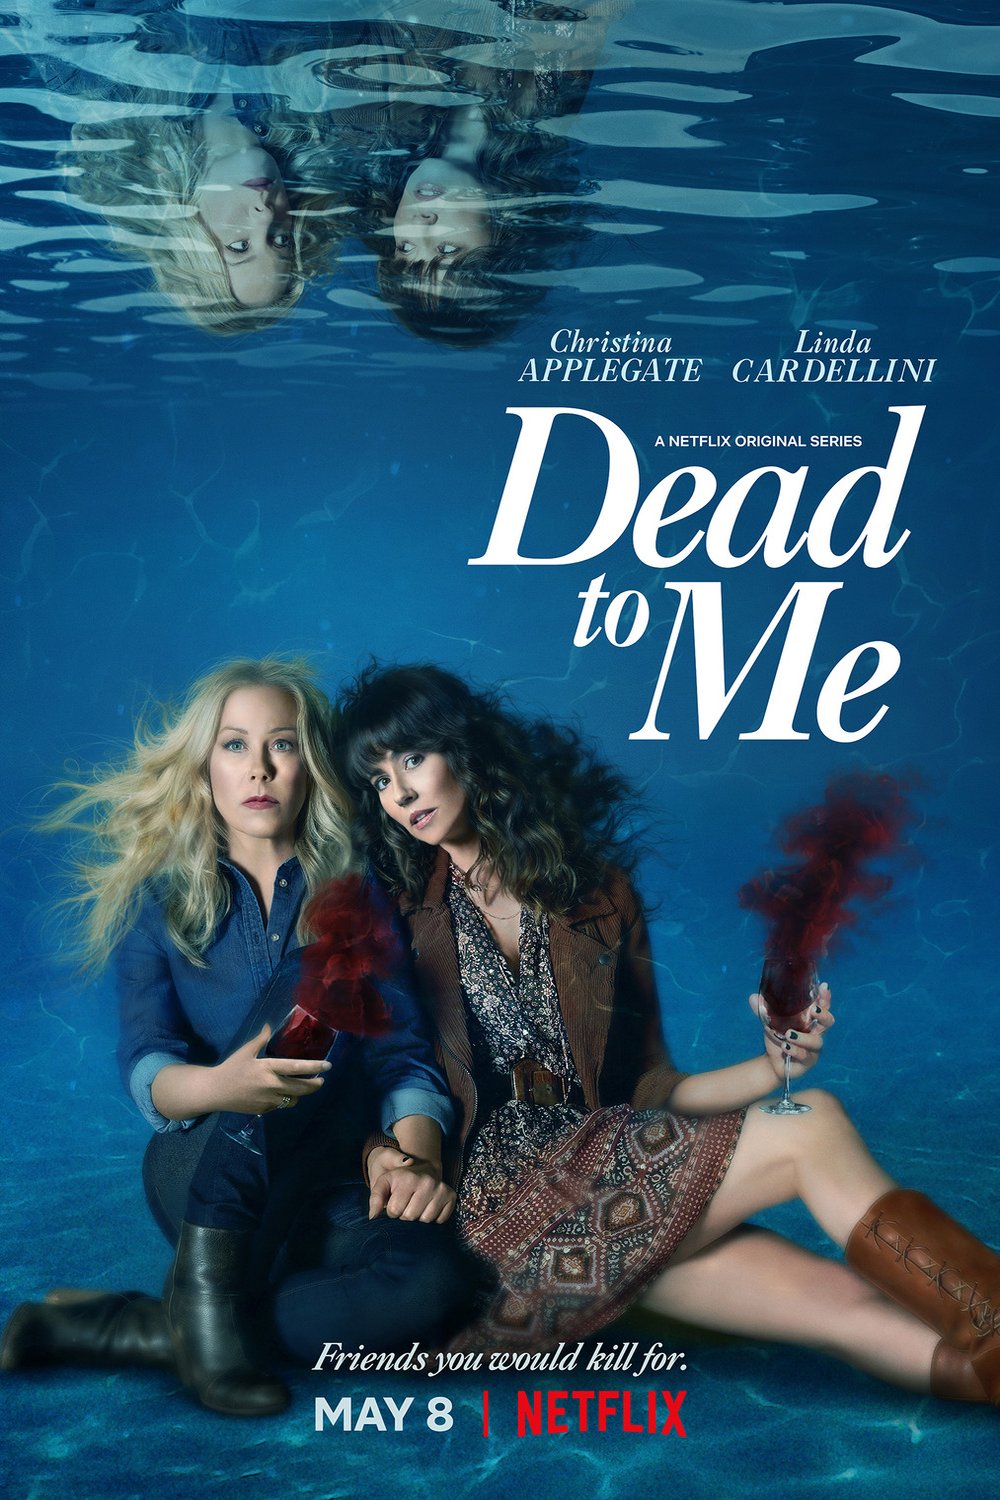 Poster of the movie Dead to Me